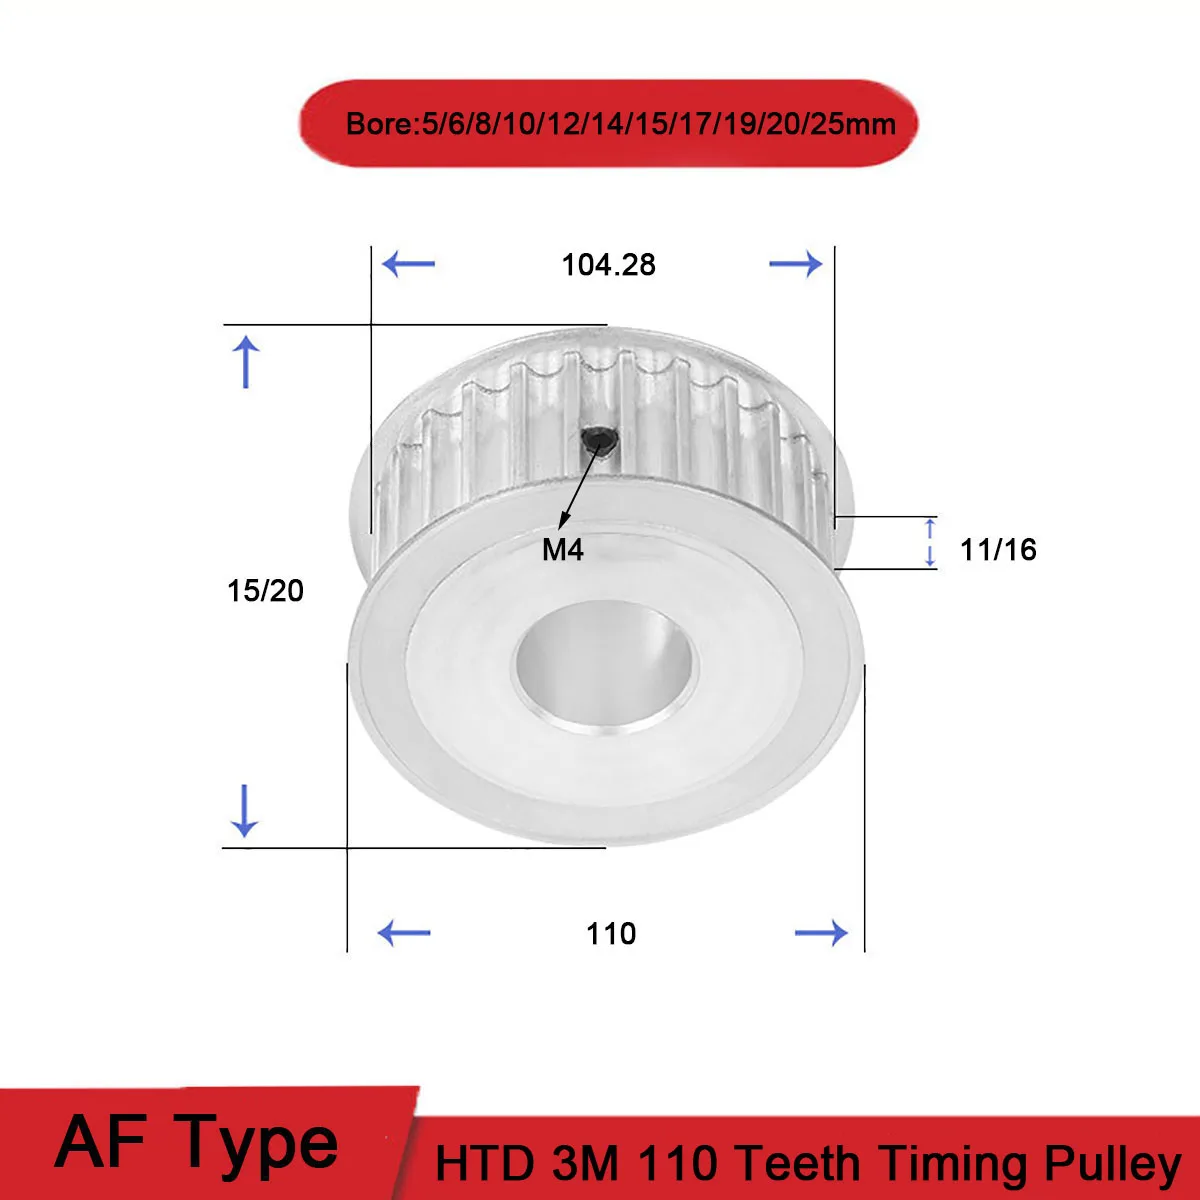 

HTD 3M 110 Teeth Timing Pulley Bore 5~25mm Gear Pulley 3mm Pitch Teeth Width 11mm 16mm Aluminum Synchronous Timing Belt Pulley